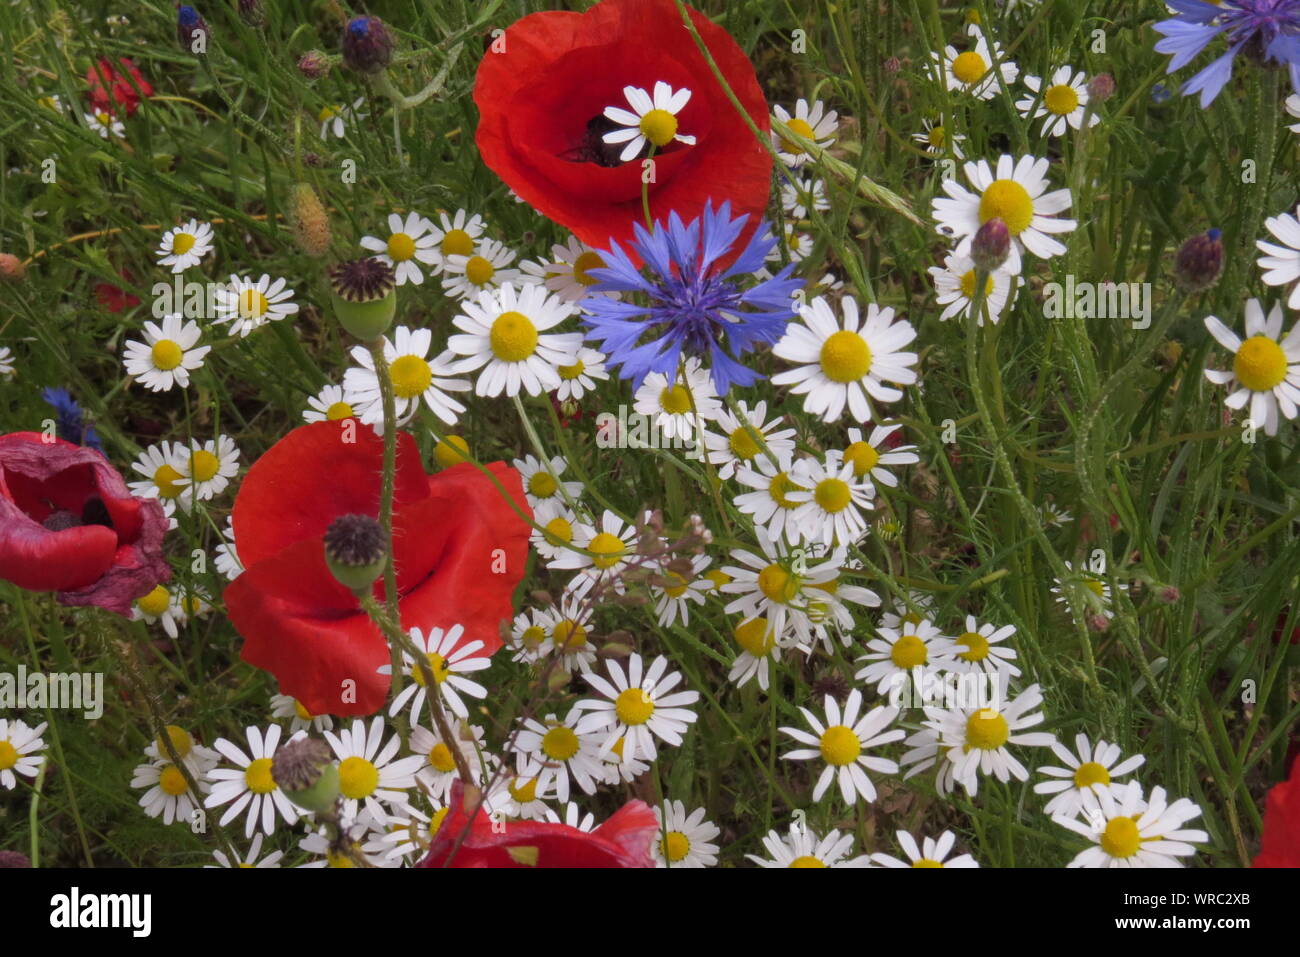 Poppies With Daisies And Knapweeds Flowers Blooming On Field Stock Photo